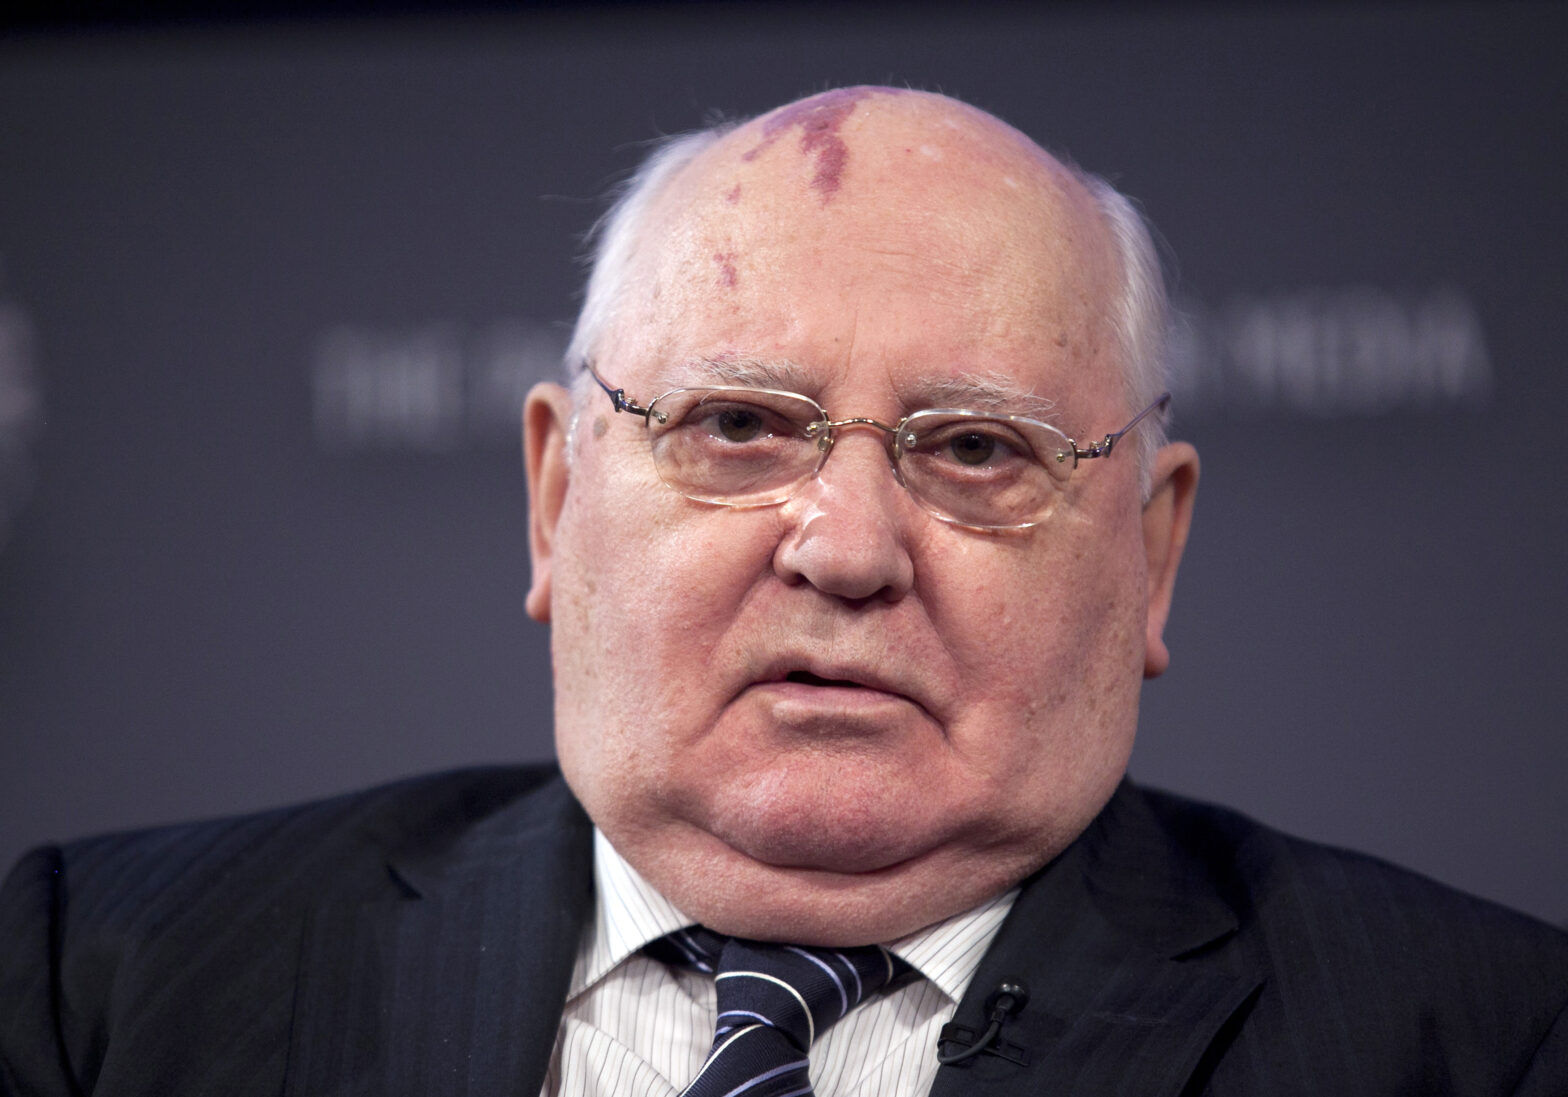 Former Soviet Union President Gorbachev speaks on a panel after the screening of "Cold War" at the Paley Center for Media in New York